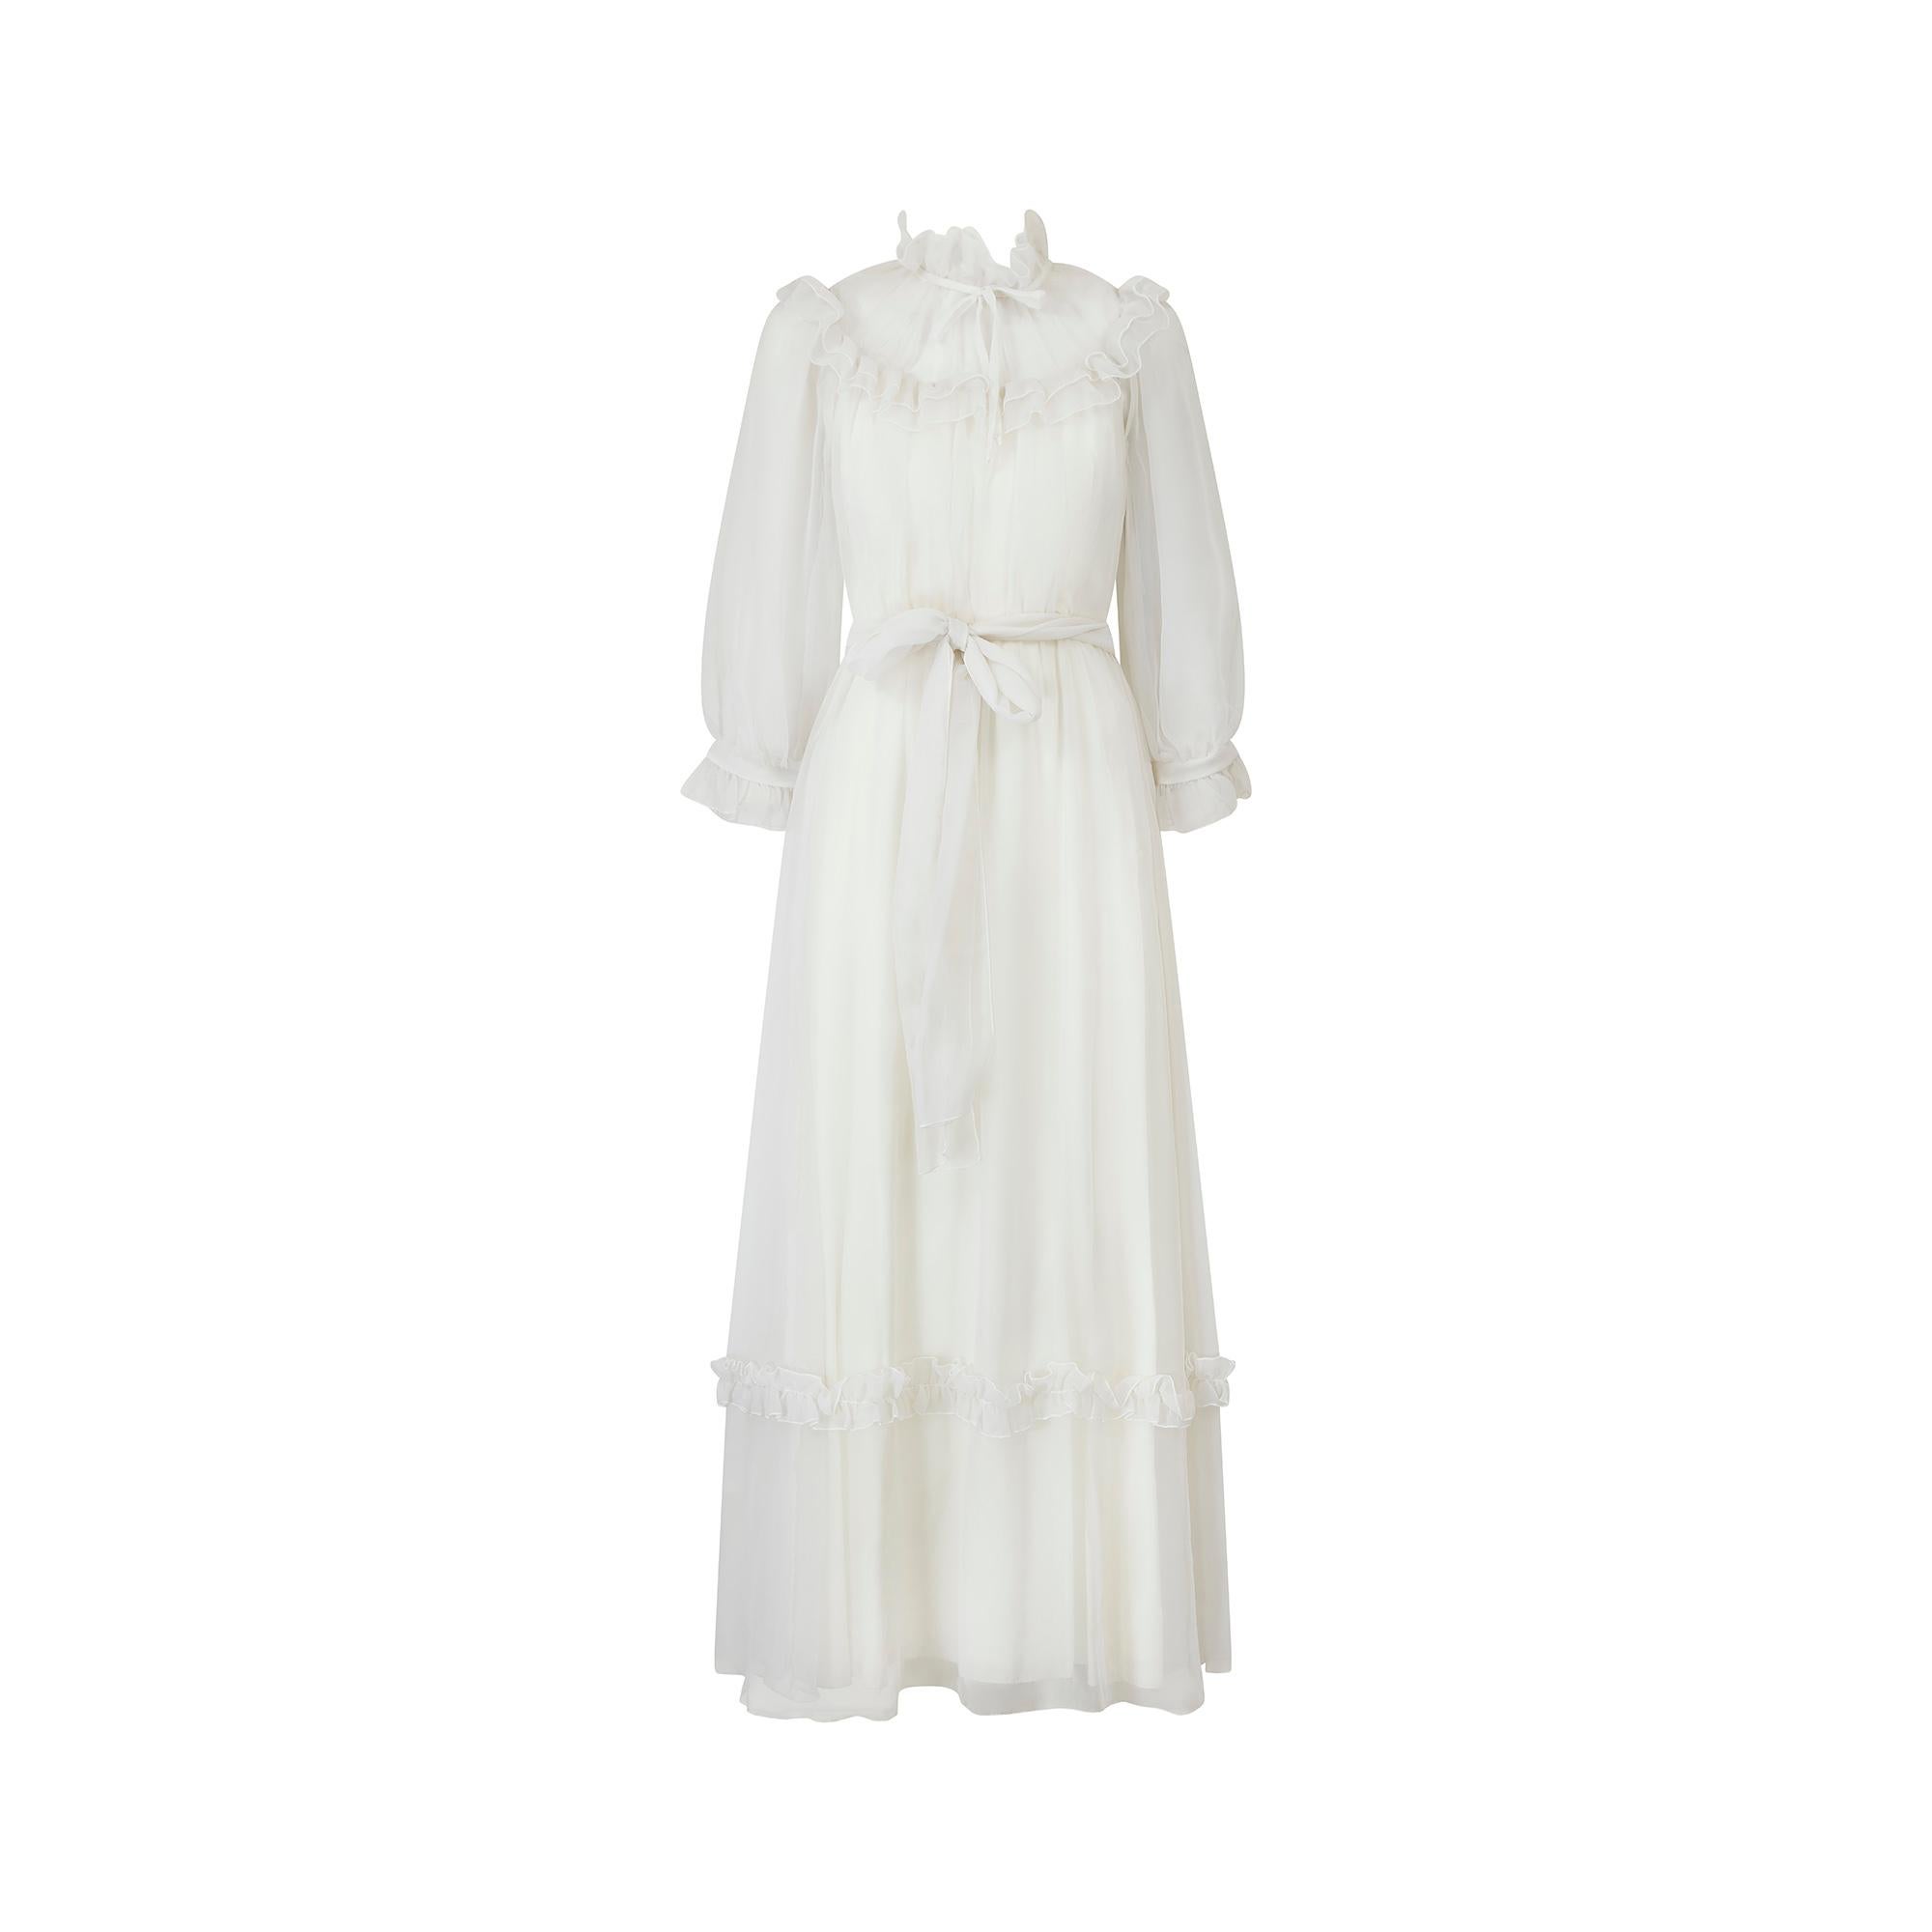 This romantic georgette bridal dress is by high-end occasion designer Vera Mont. We've had several early pieces by this designer over the years and they never fail to disappoint, they're always really well made with quality fabrics and attention to